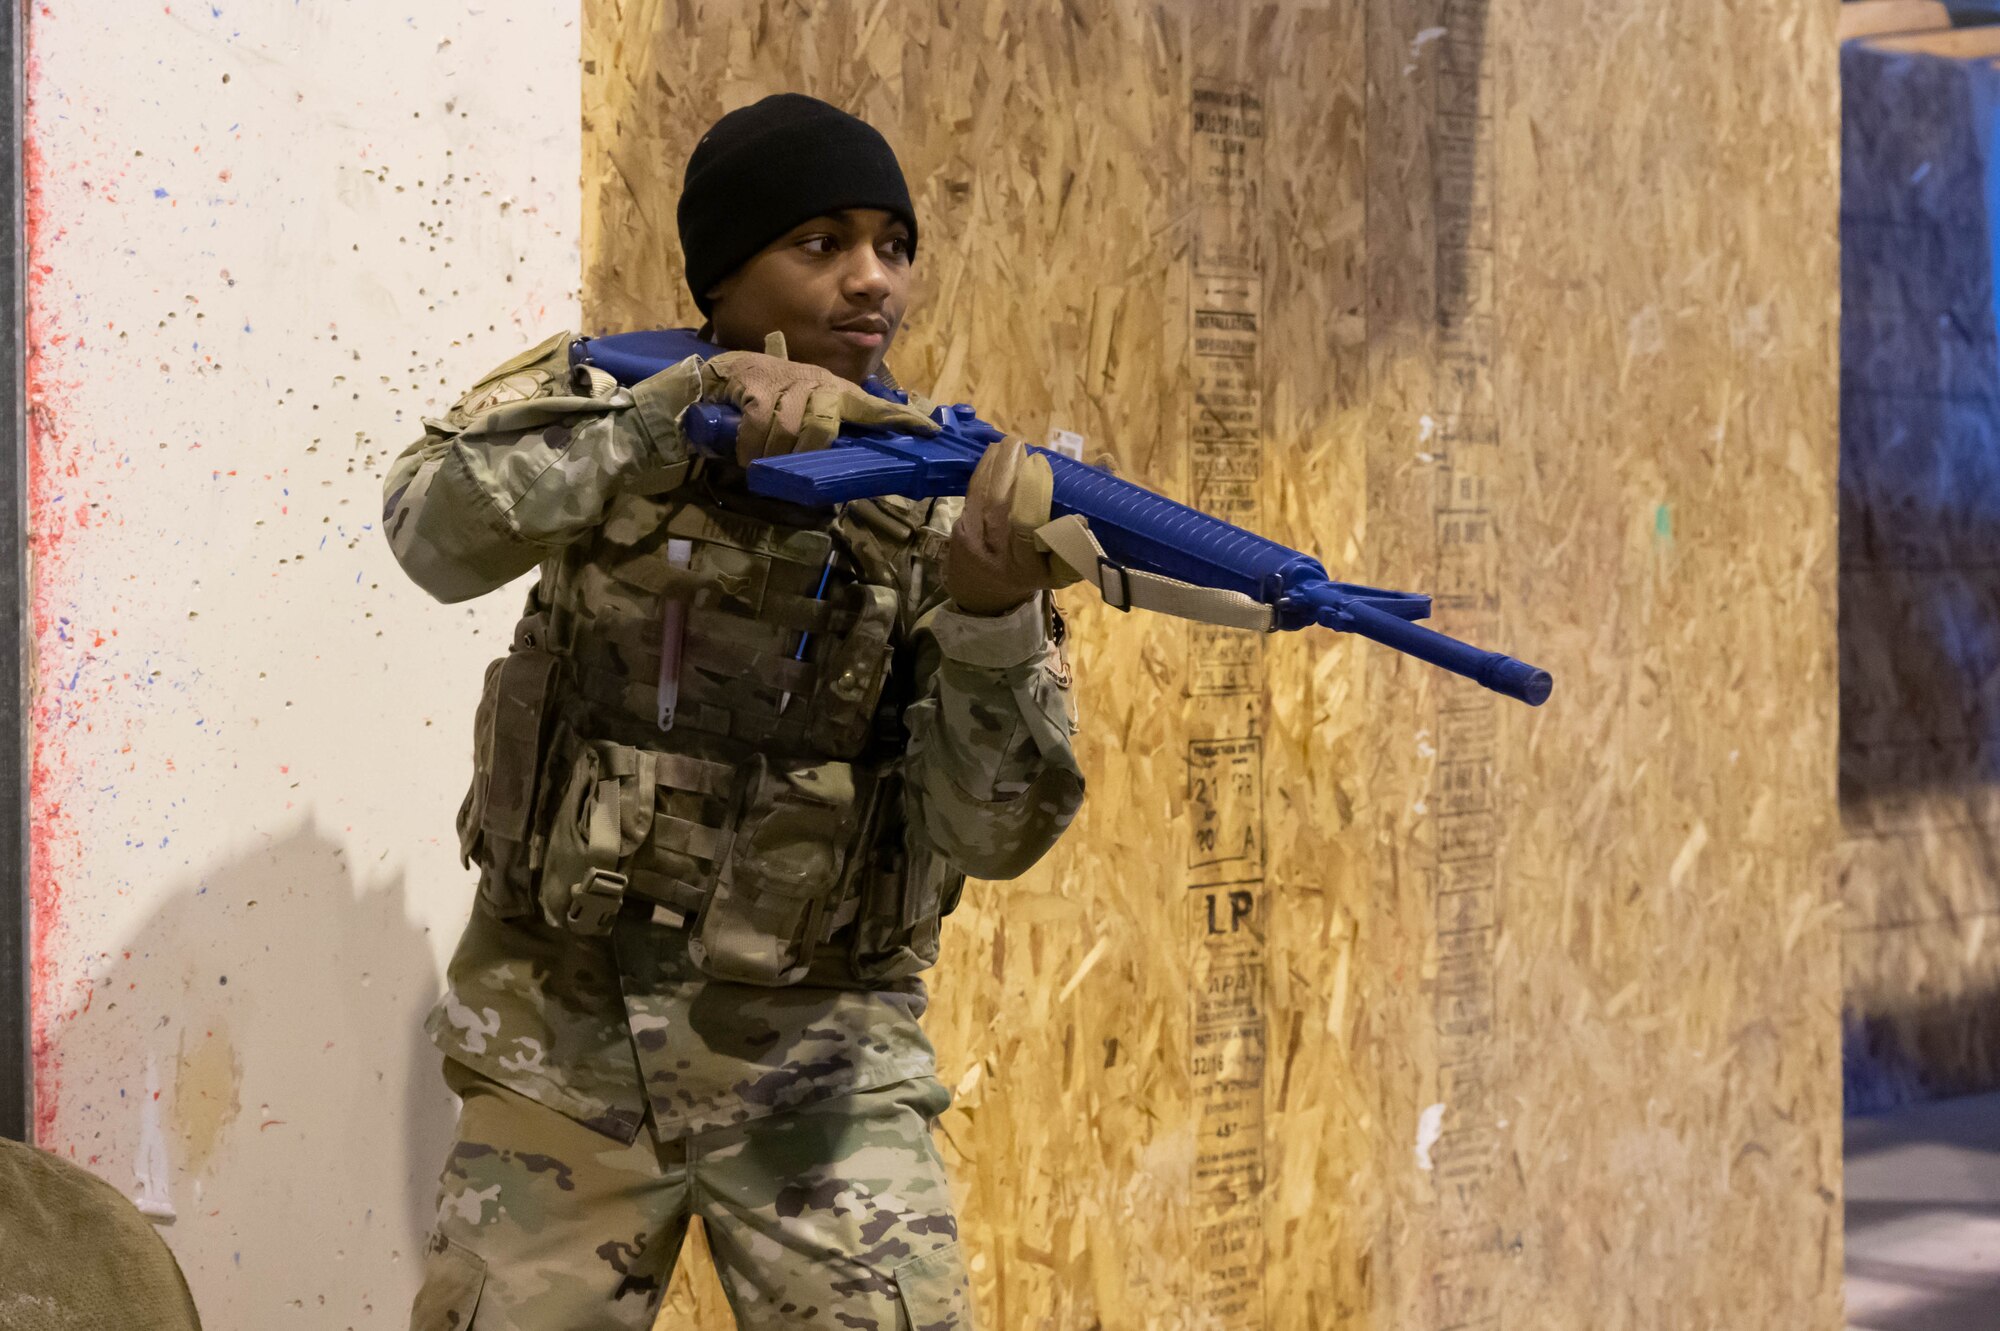 Airman 1st Class Joshua Haynes, 341st Security Forces Squadron member, holds a trainer weapon at the ready during active shooter training April 27, 2021 at Malmstrom Air Force Base, Mont.